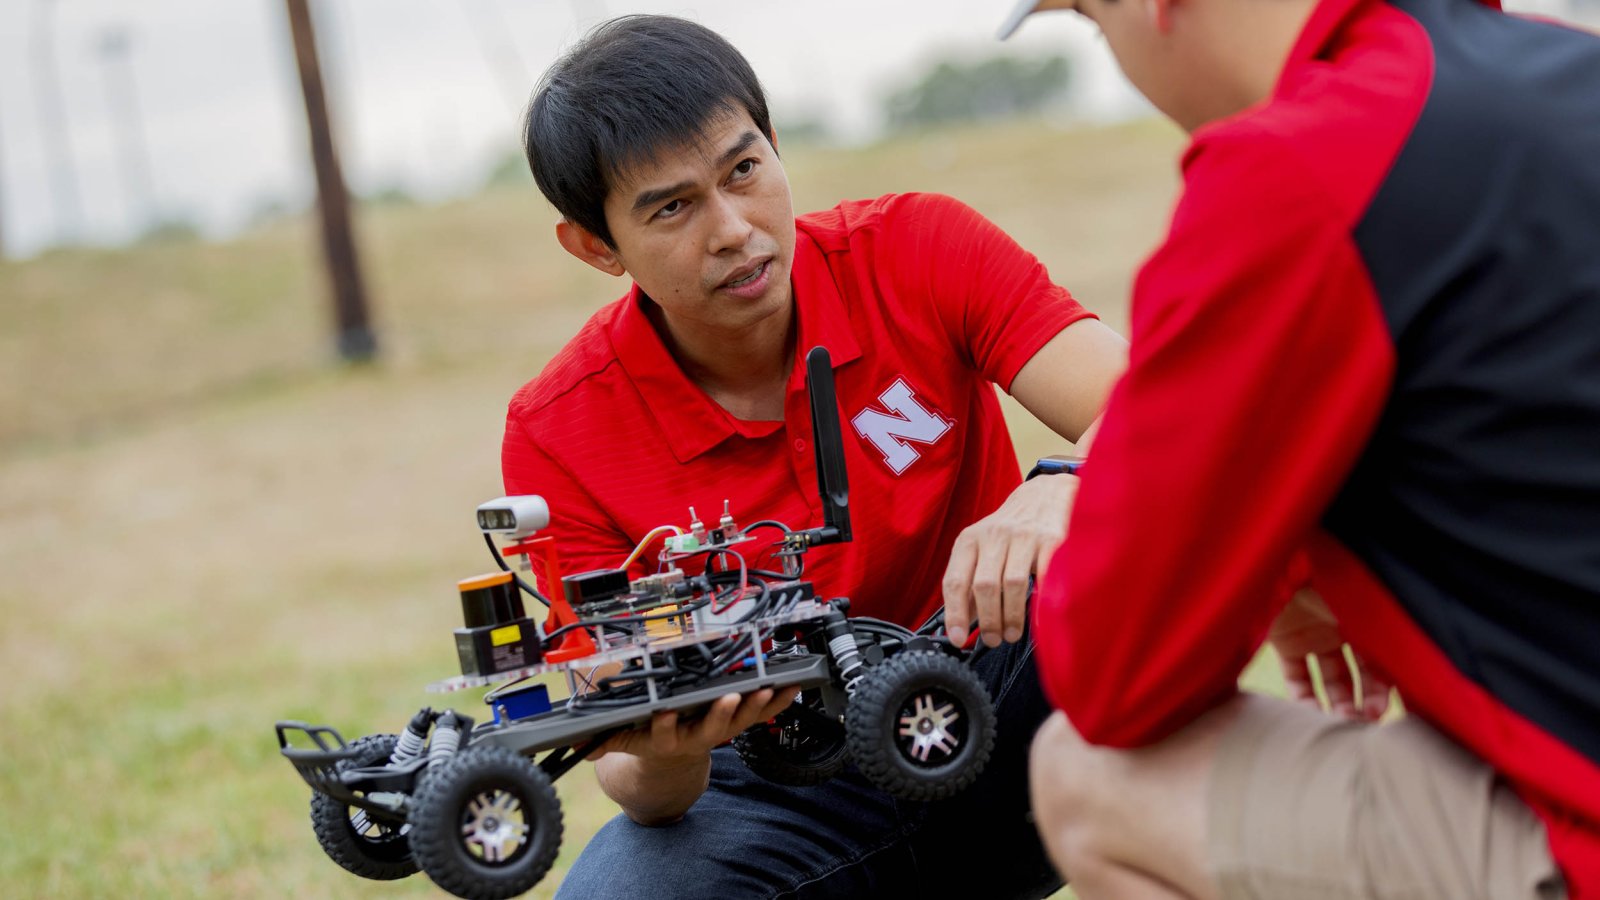 Dung Hoang Tran is developing a verification tool that will make autonomous vehicles safer and smarter. (Craig Chandler / University Communication and Marketing)